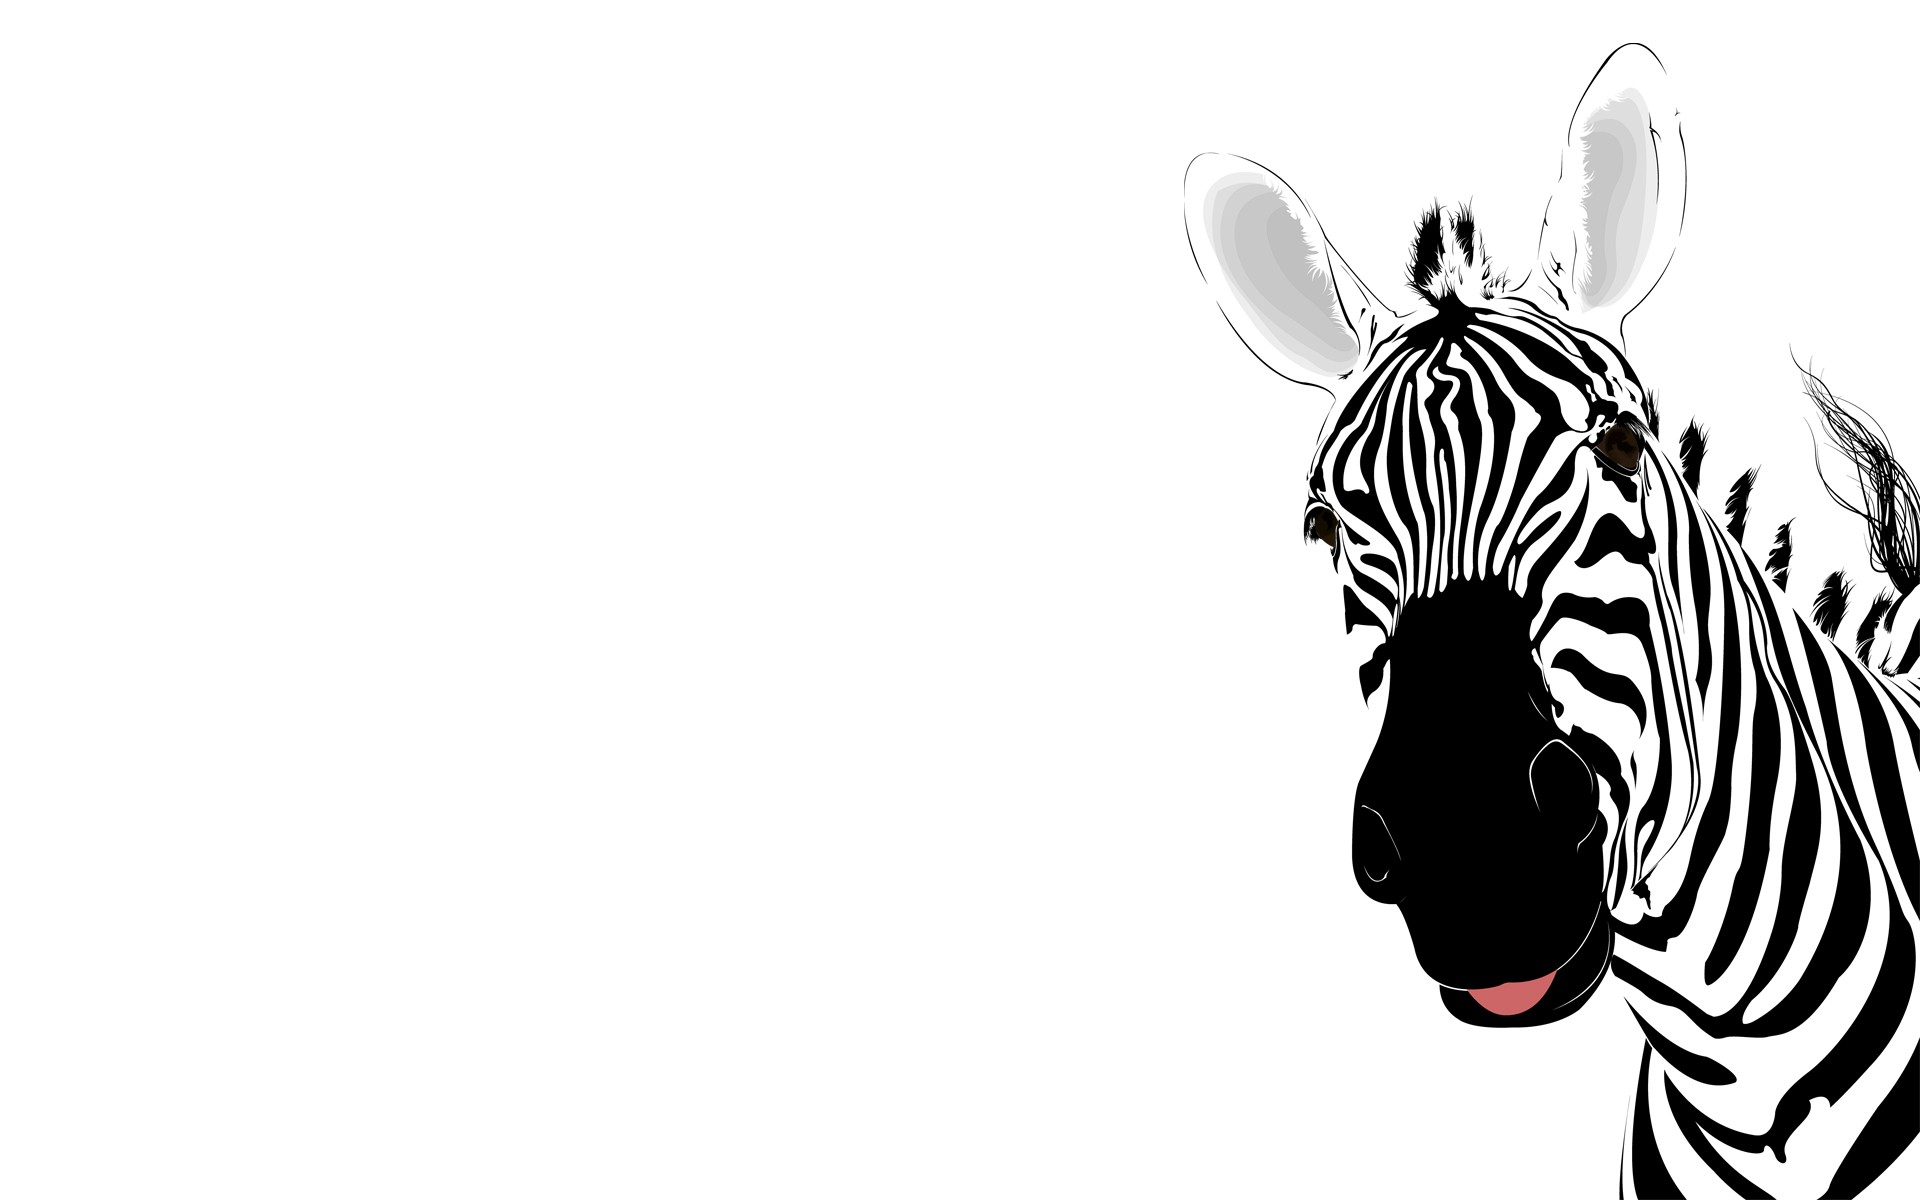 Free Zebra Animal Template Backgrounds For PowerPoint - Animal PPT 